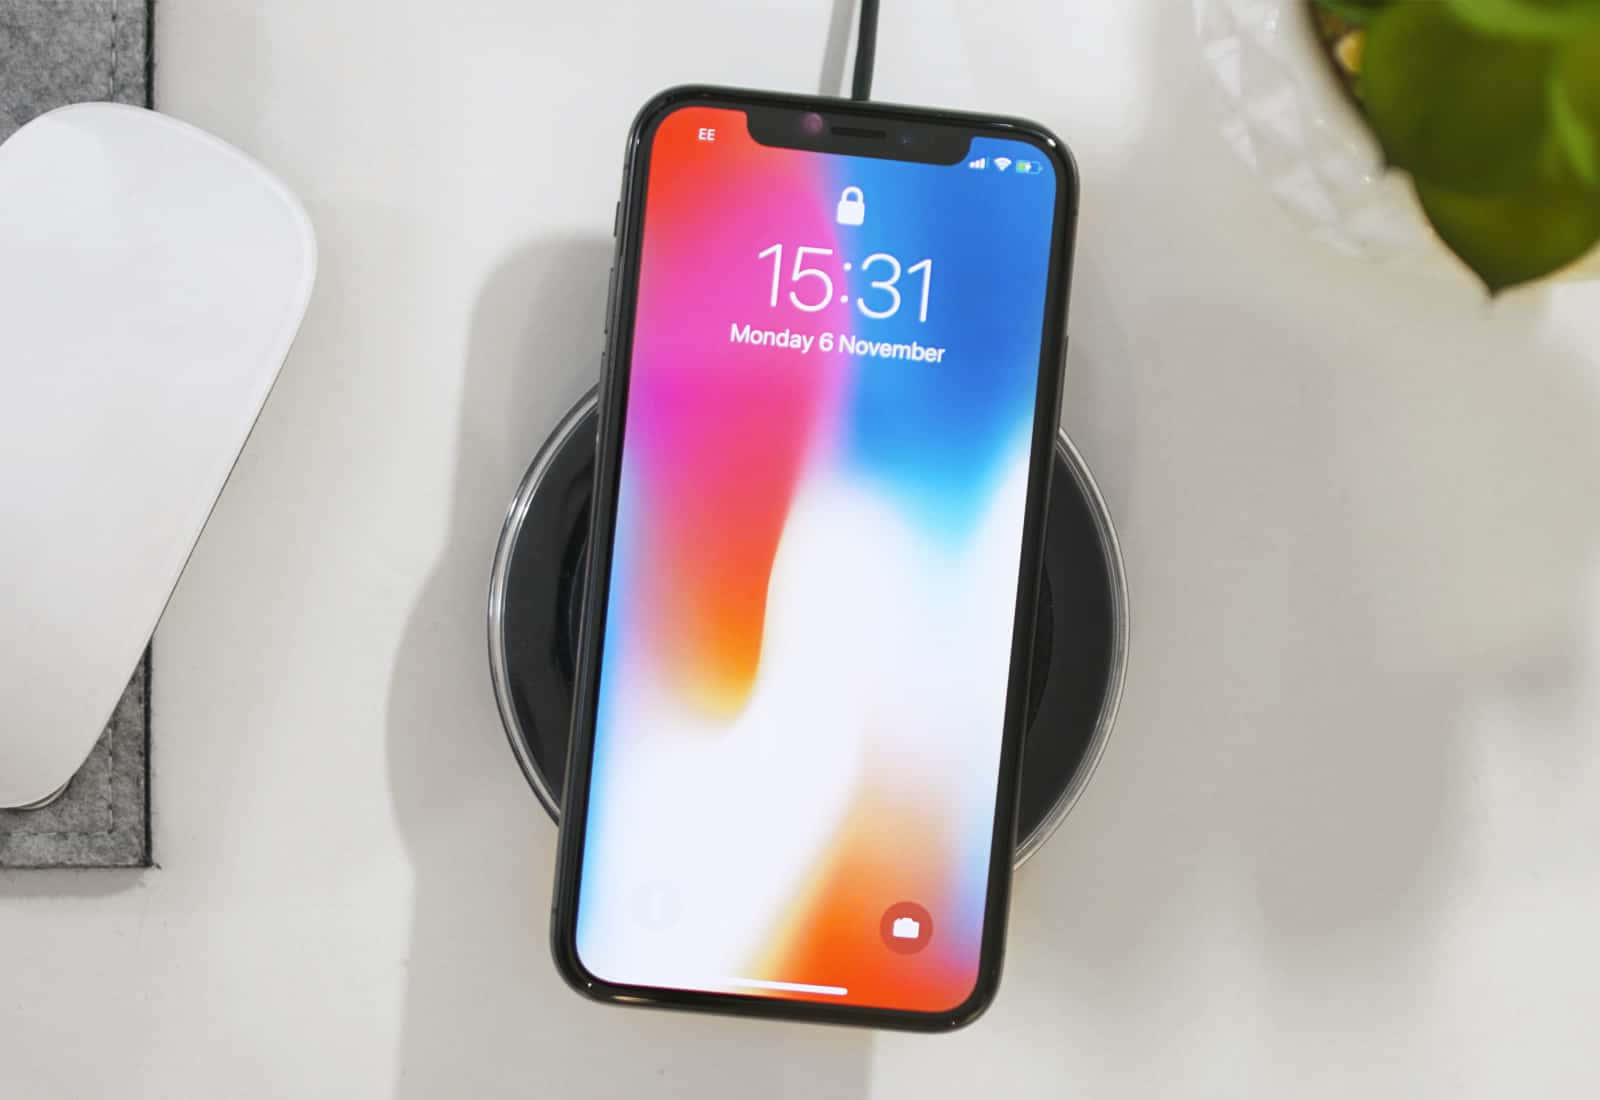 Power up your devices with ease with wireless charging Wallpaper